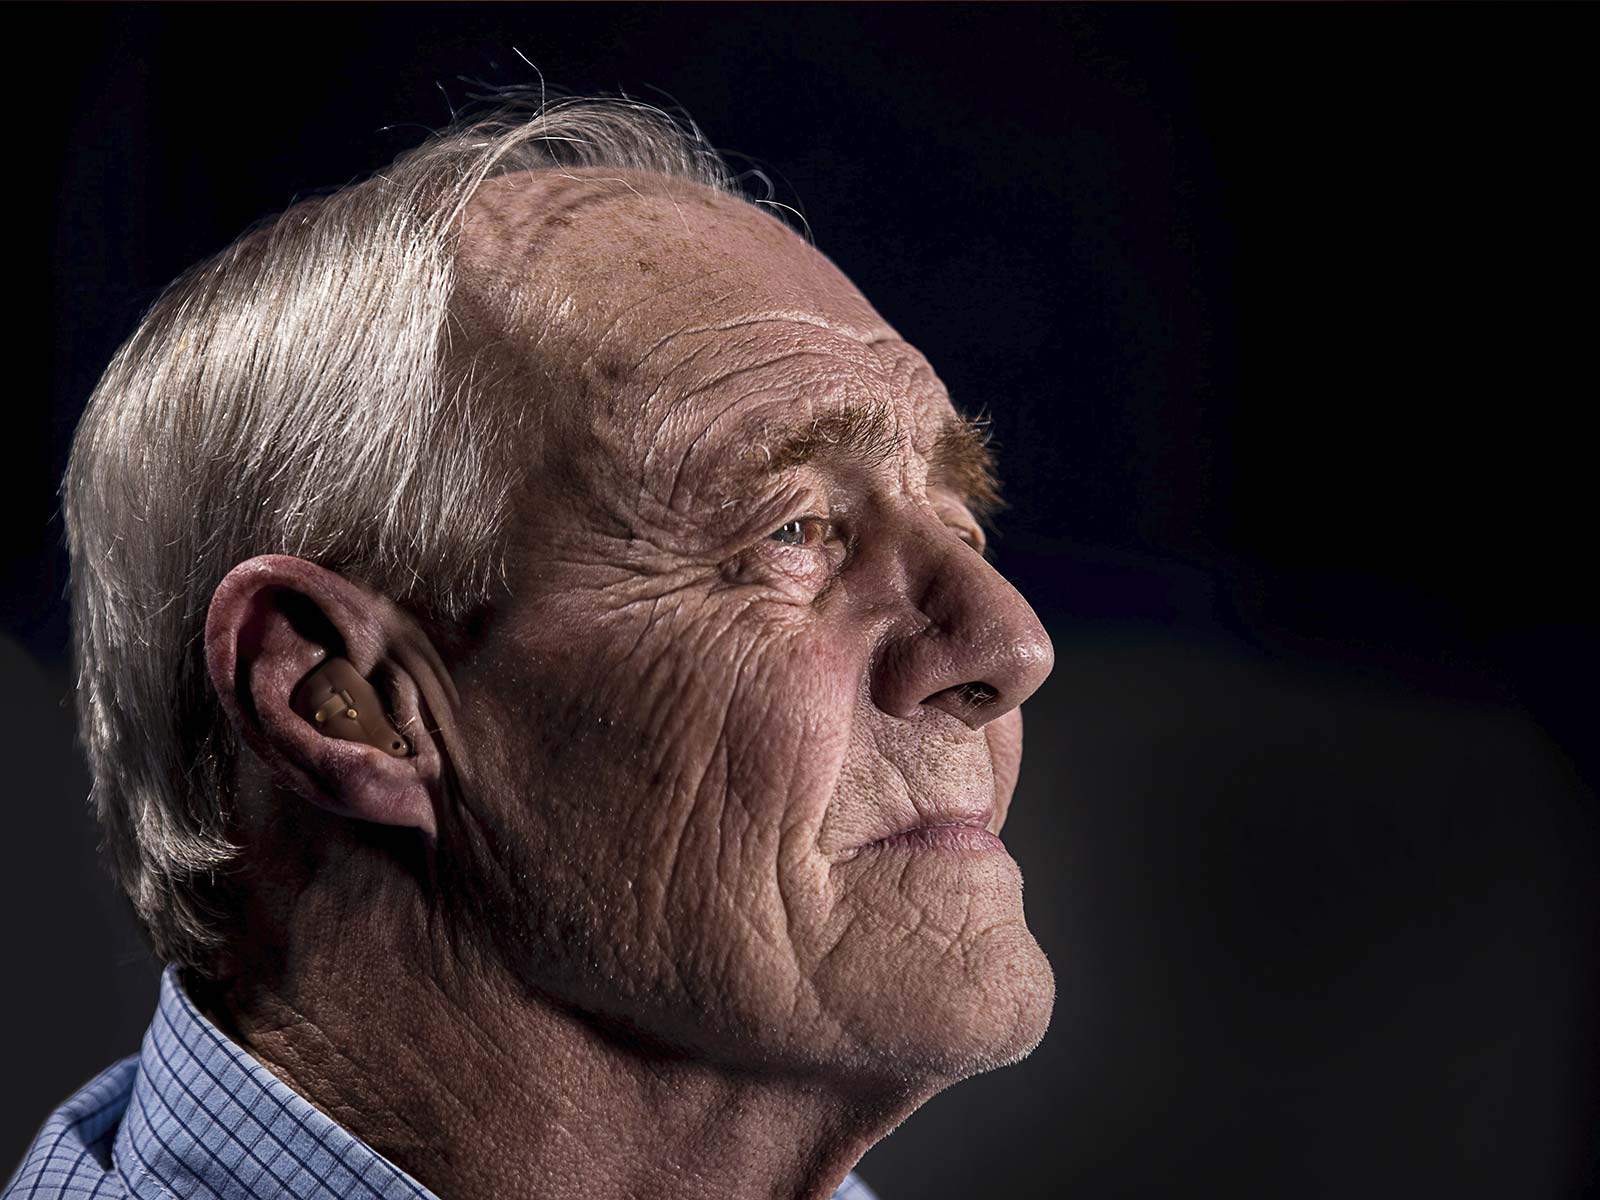 A photo of a gentleman wearing a hearing aid.